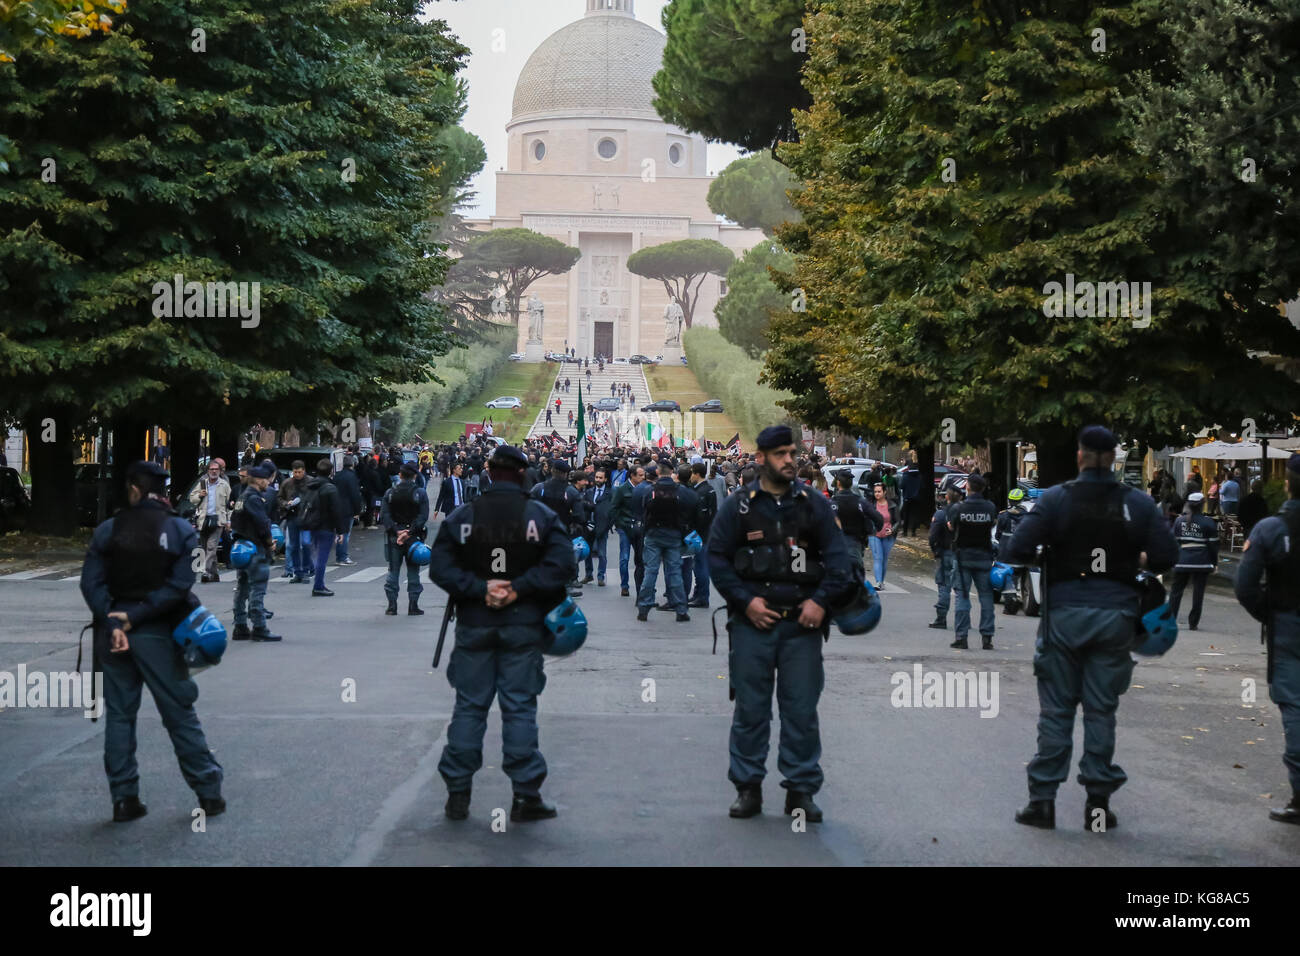 Rome, Italy 4 November 2017. Demonstration of the political movement called 'Forza Nuova' held in Rome in the EUR zone on 04 November 2017. Rome, Italy 4 November 2017 Credit: Simone De Santis / Alamy Live News Stock Photo